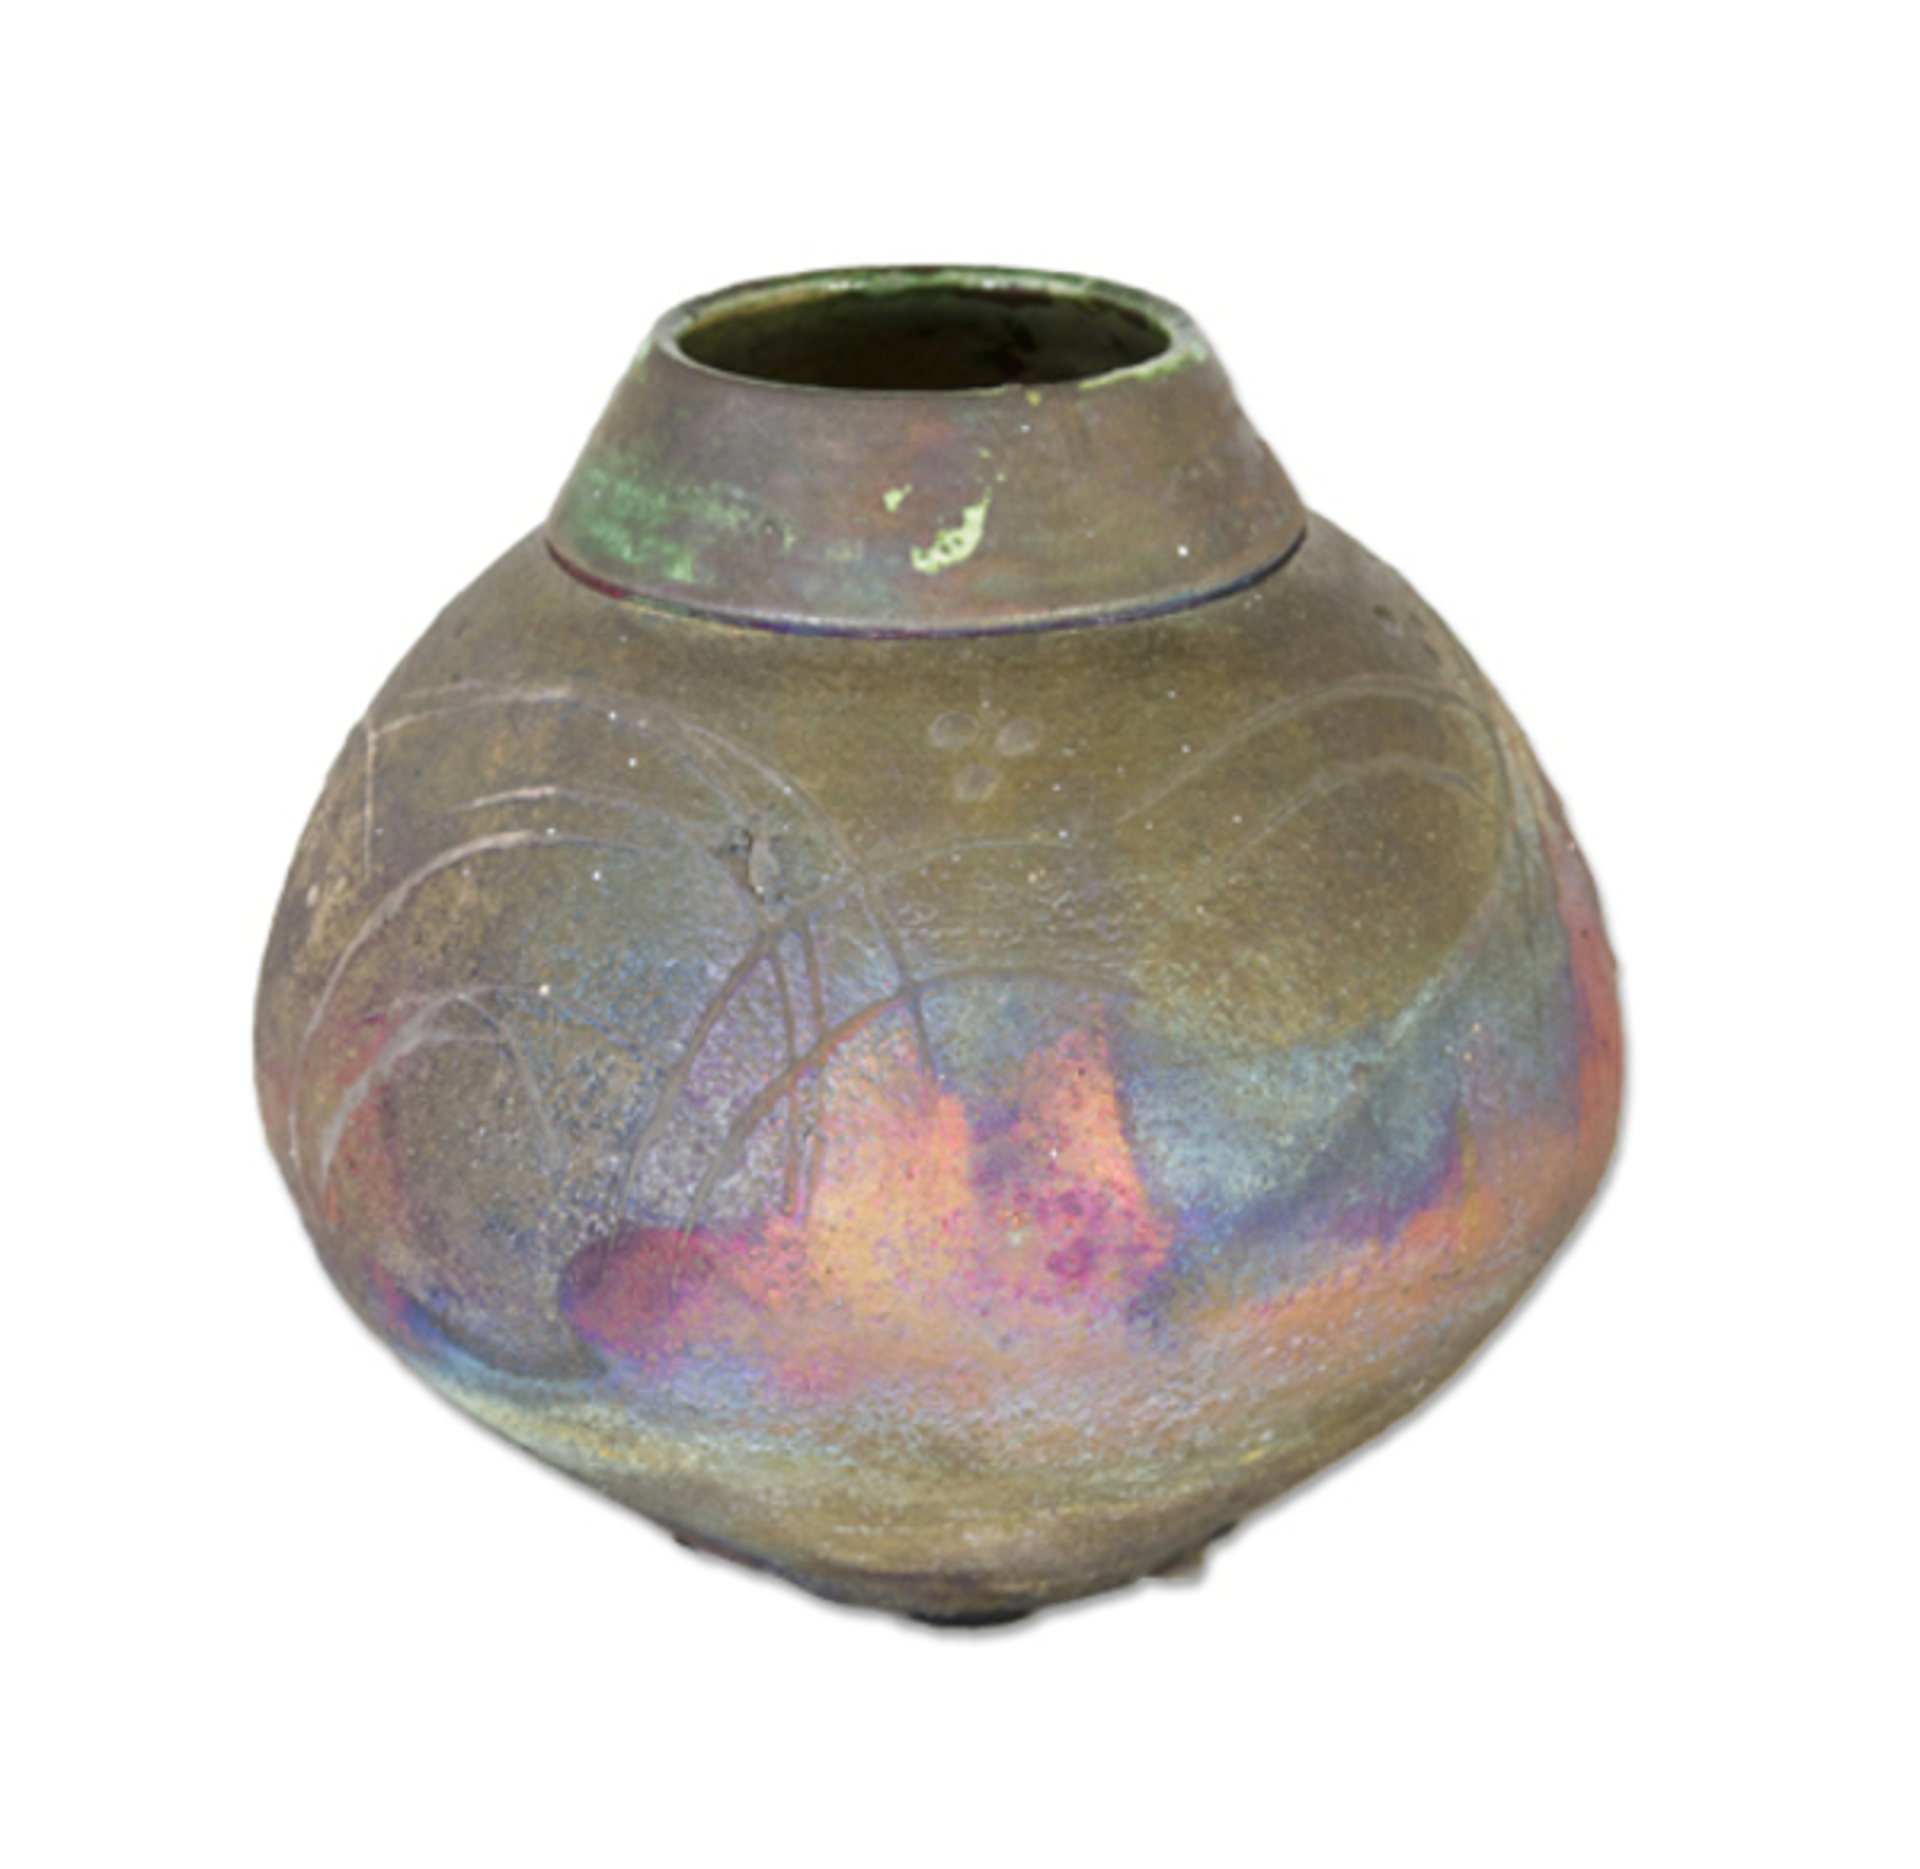 Raku Vase With Fireworks by Marty Marcus